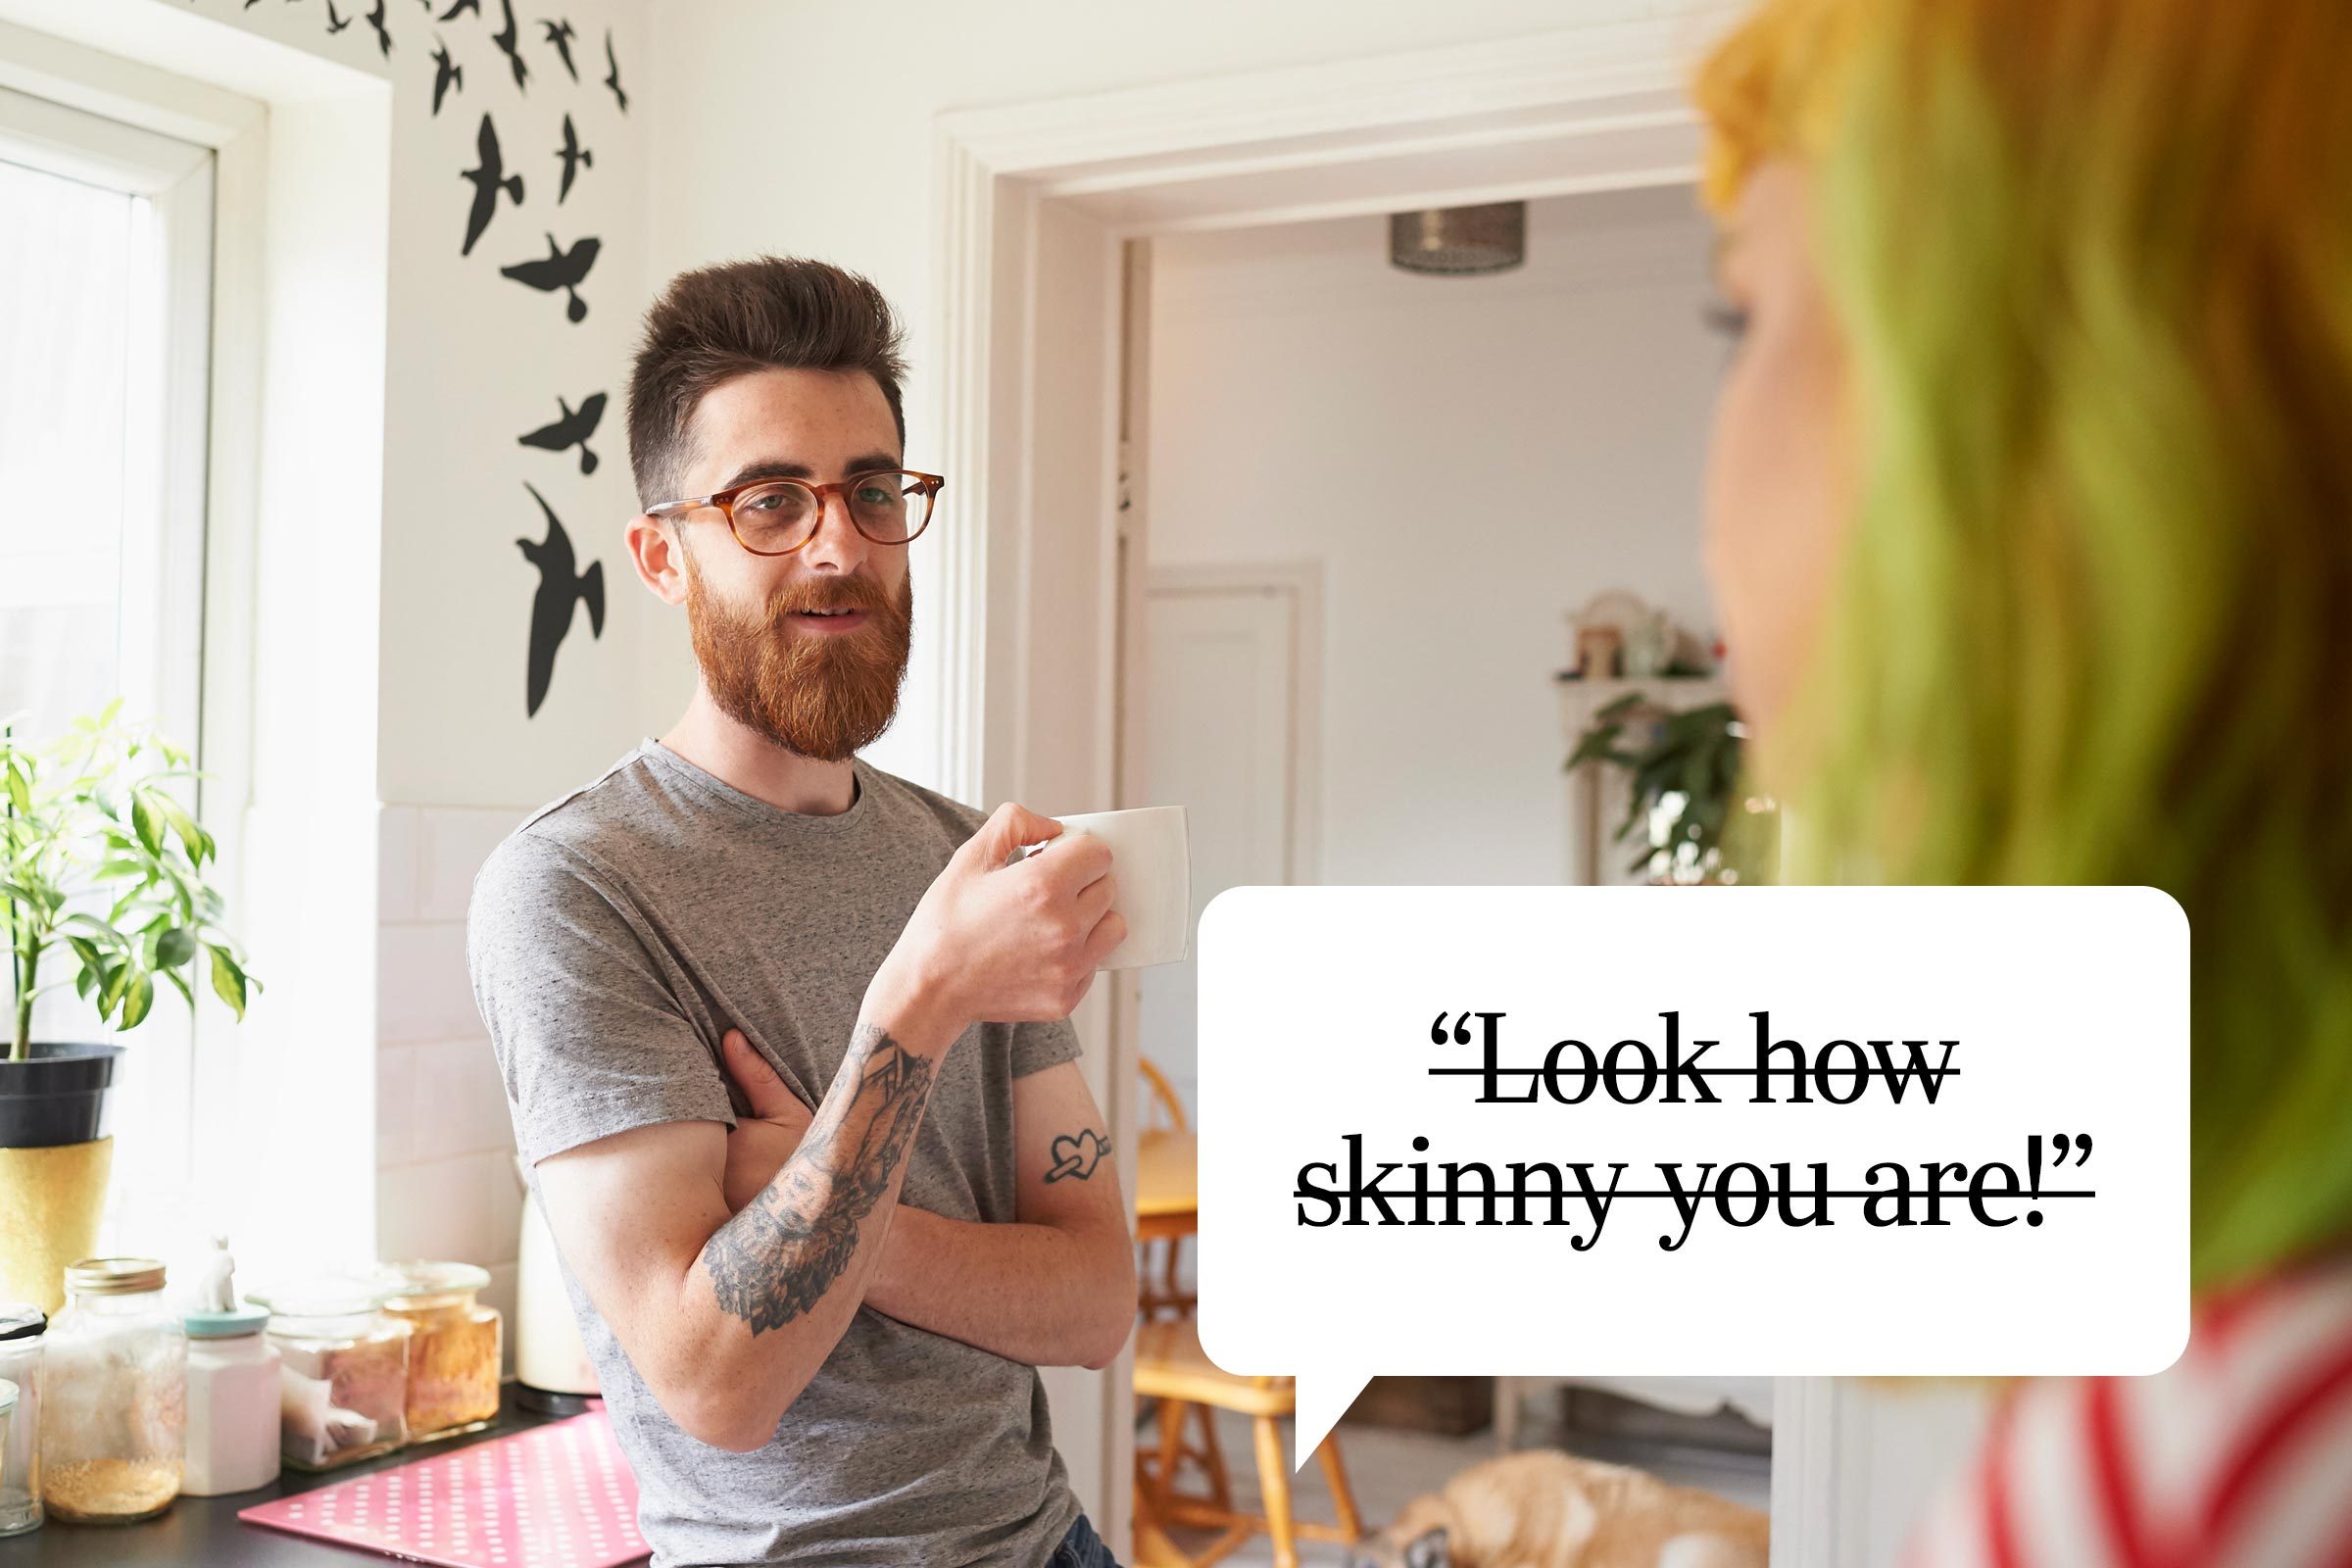 Speech bubble text: "Look how skinny you are!"